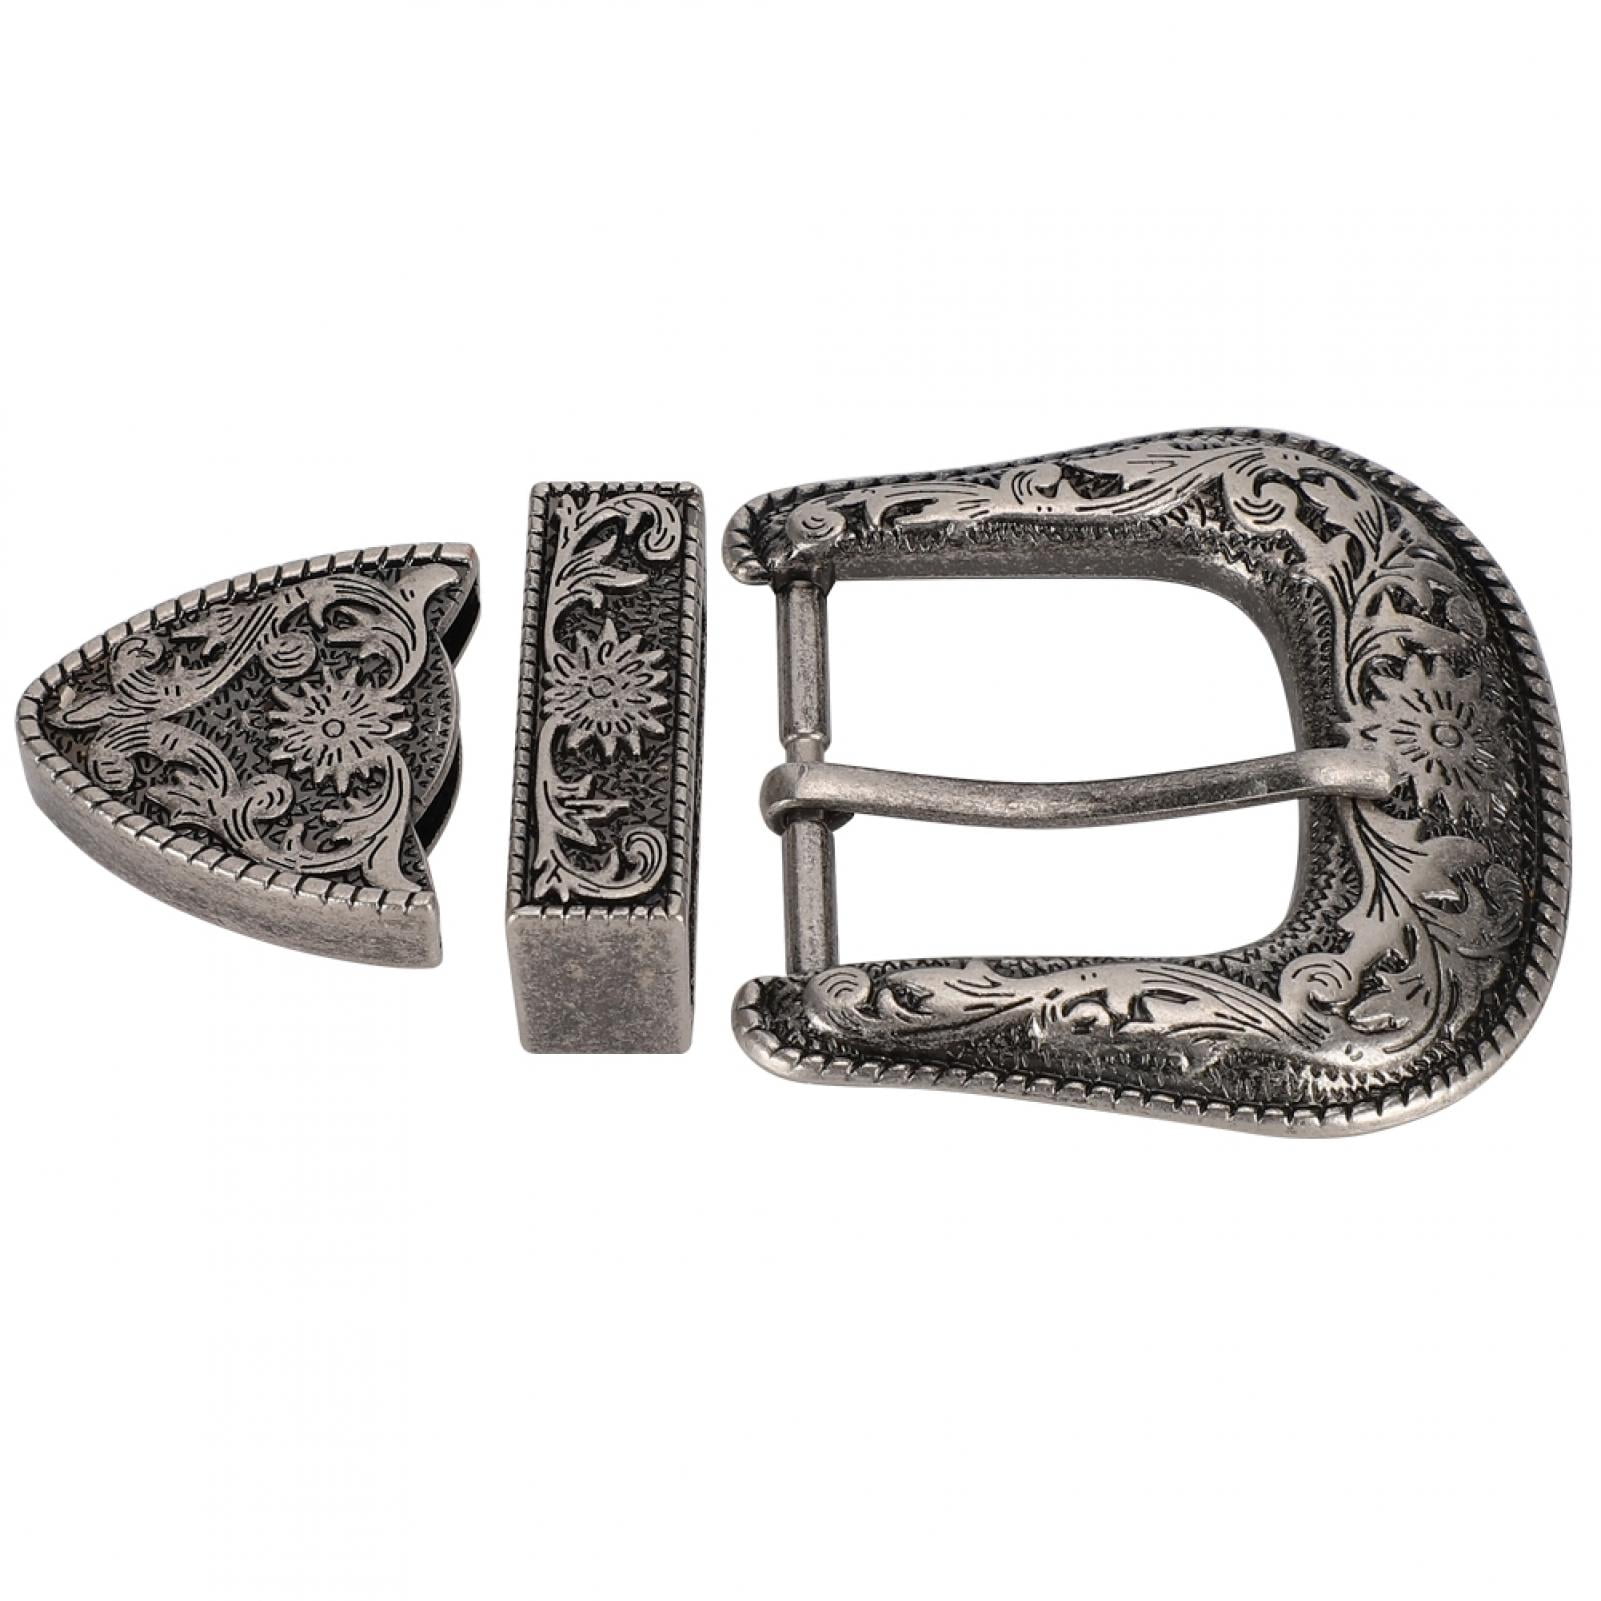 Domqga Easy to Operate Leather Belt Buckle